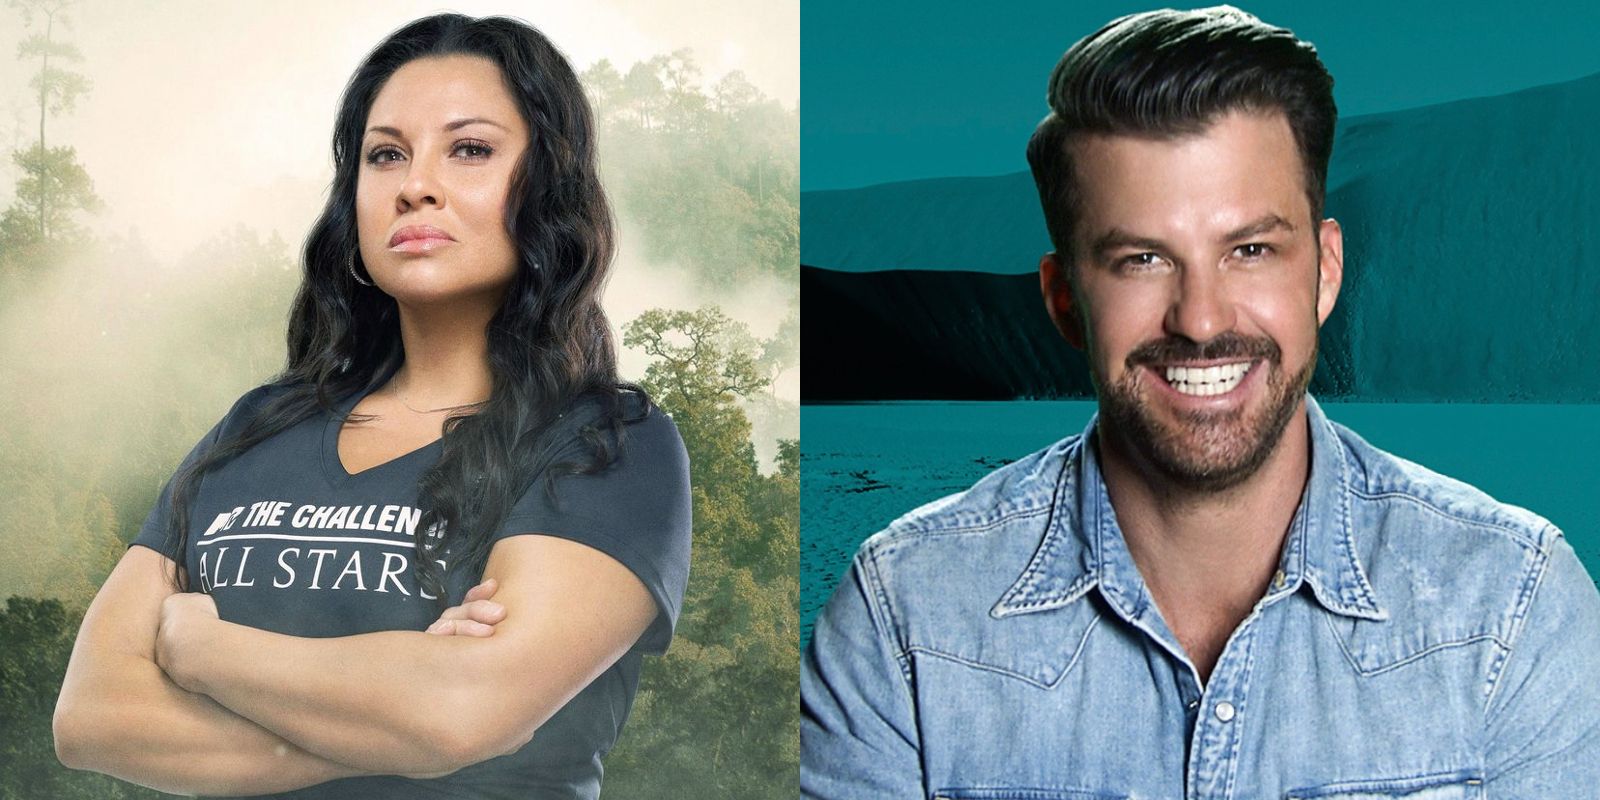 The Challenge: Tina Barta Calls Out Johnny Bananas In Deleted Tweets